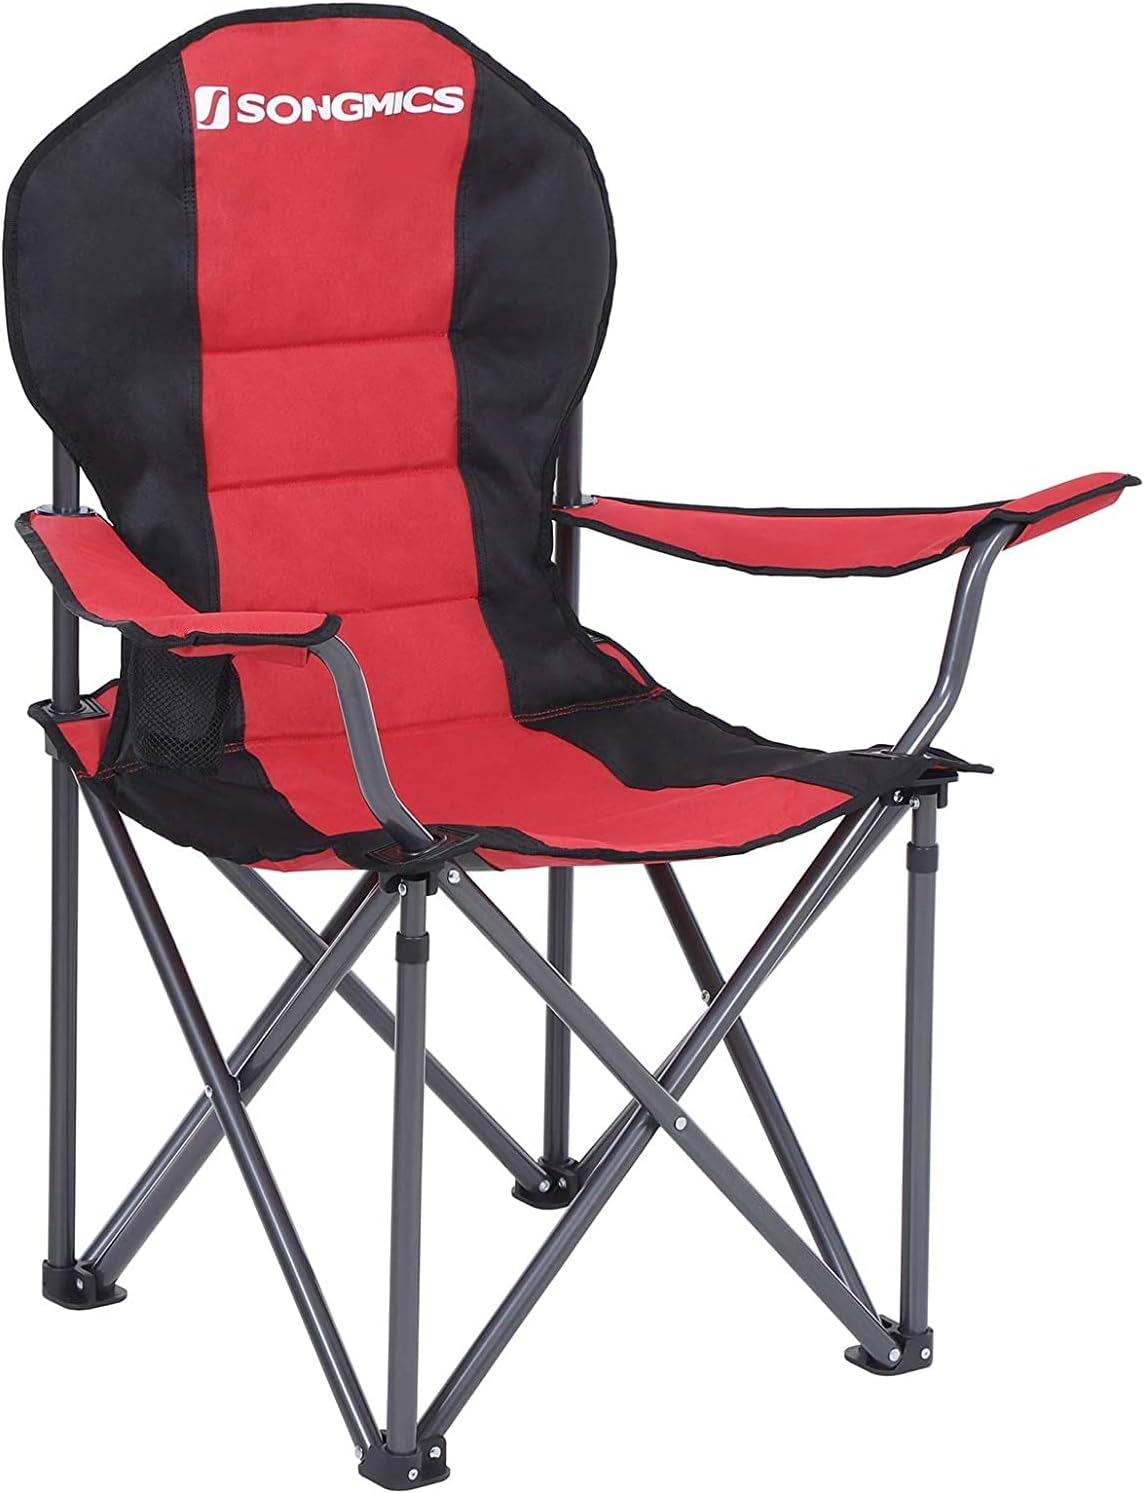 SONGMICS Folding Camping Chair with Bottle Holder Red and Black GCB06BK - SILBERSHELL